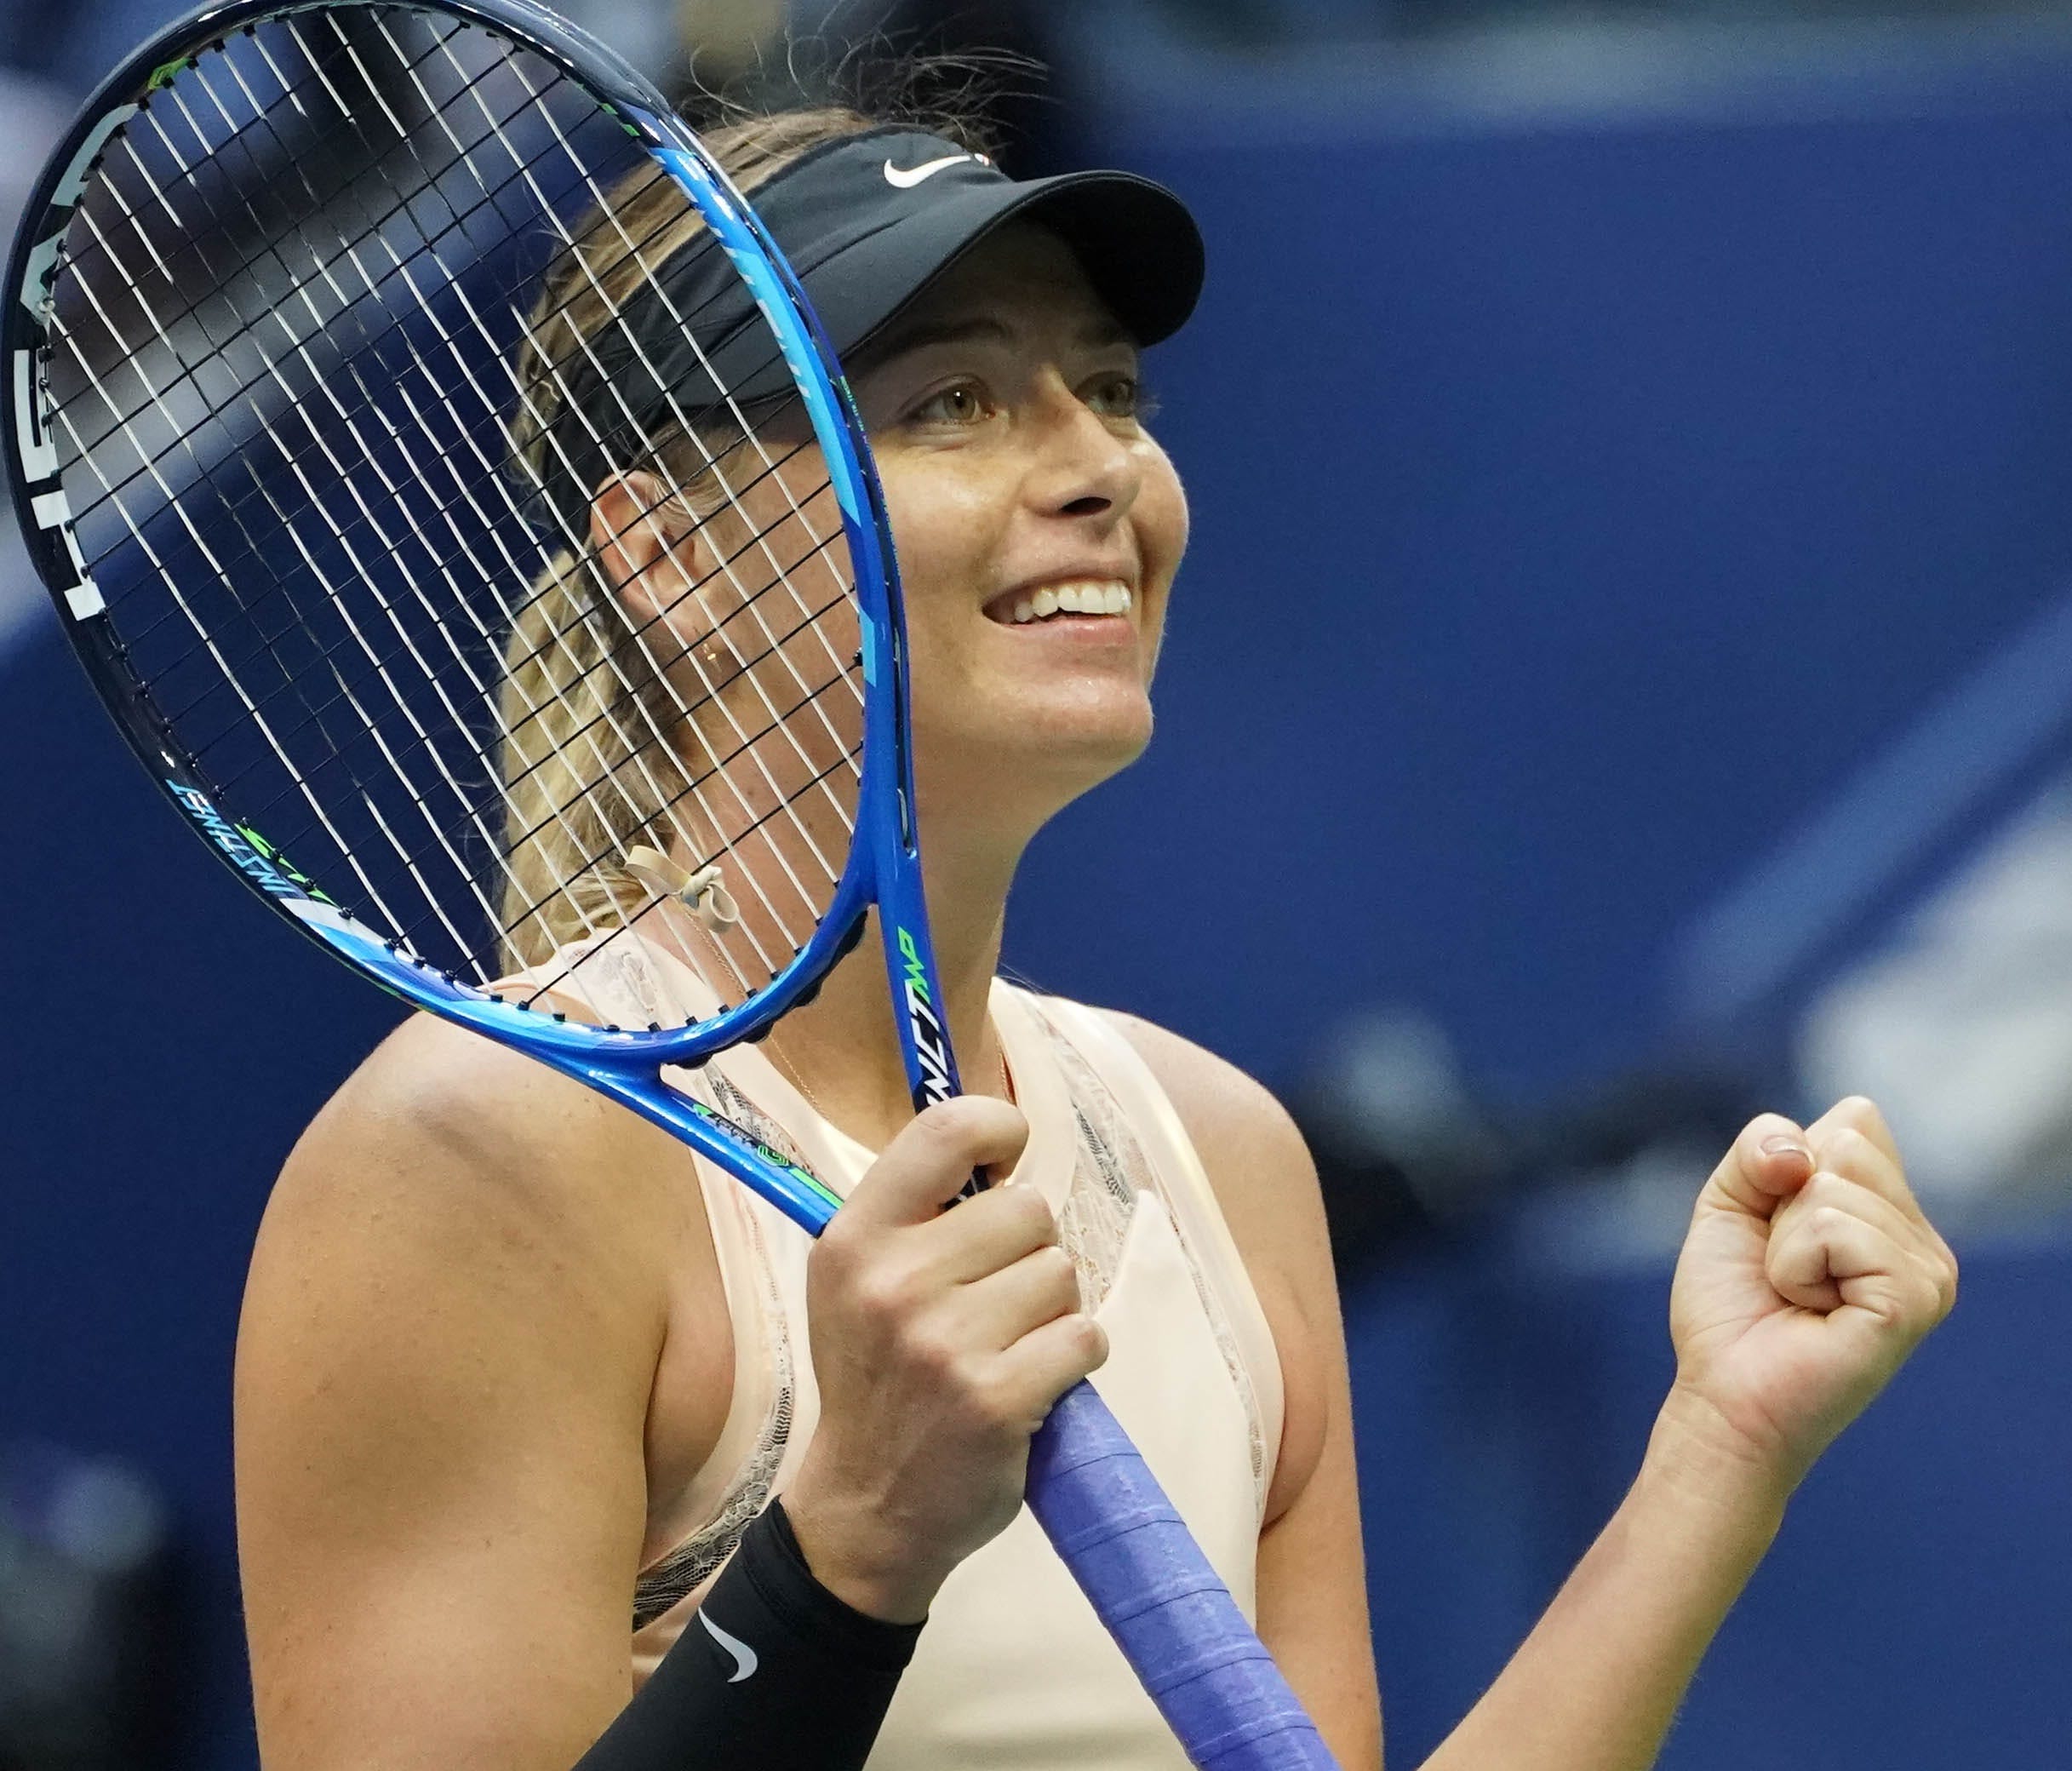 Maria Sharapova needed three sets and 2 hours, 19 minutes, but she's into the third round in New York.